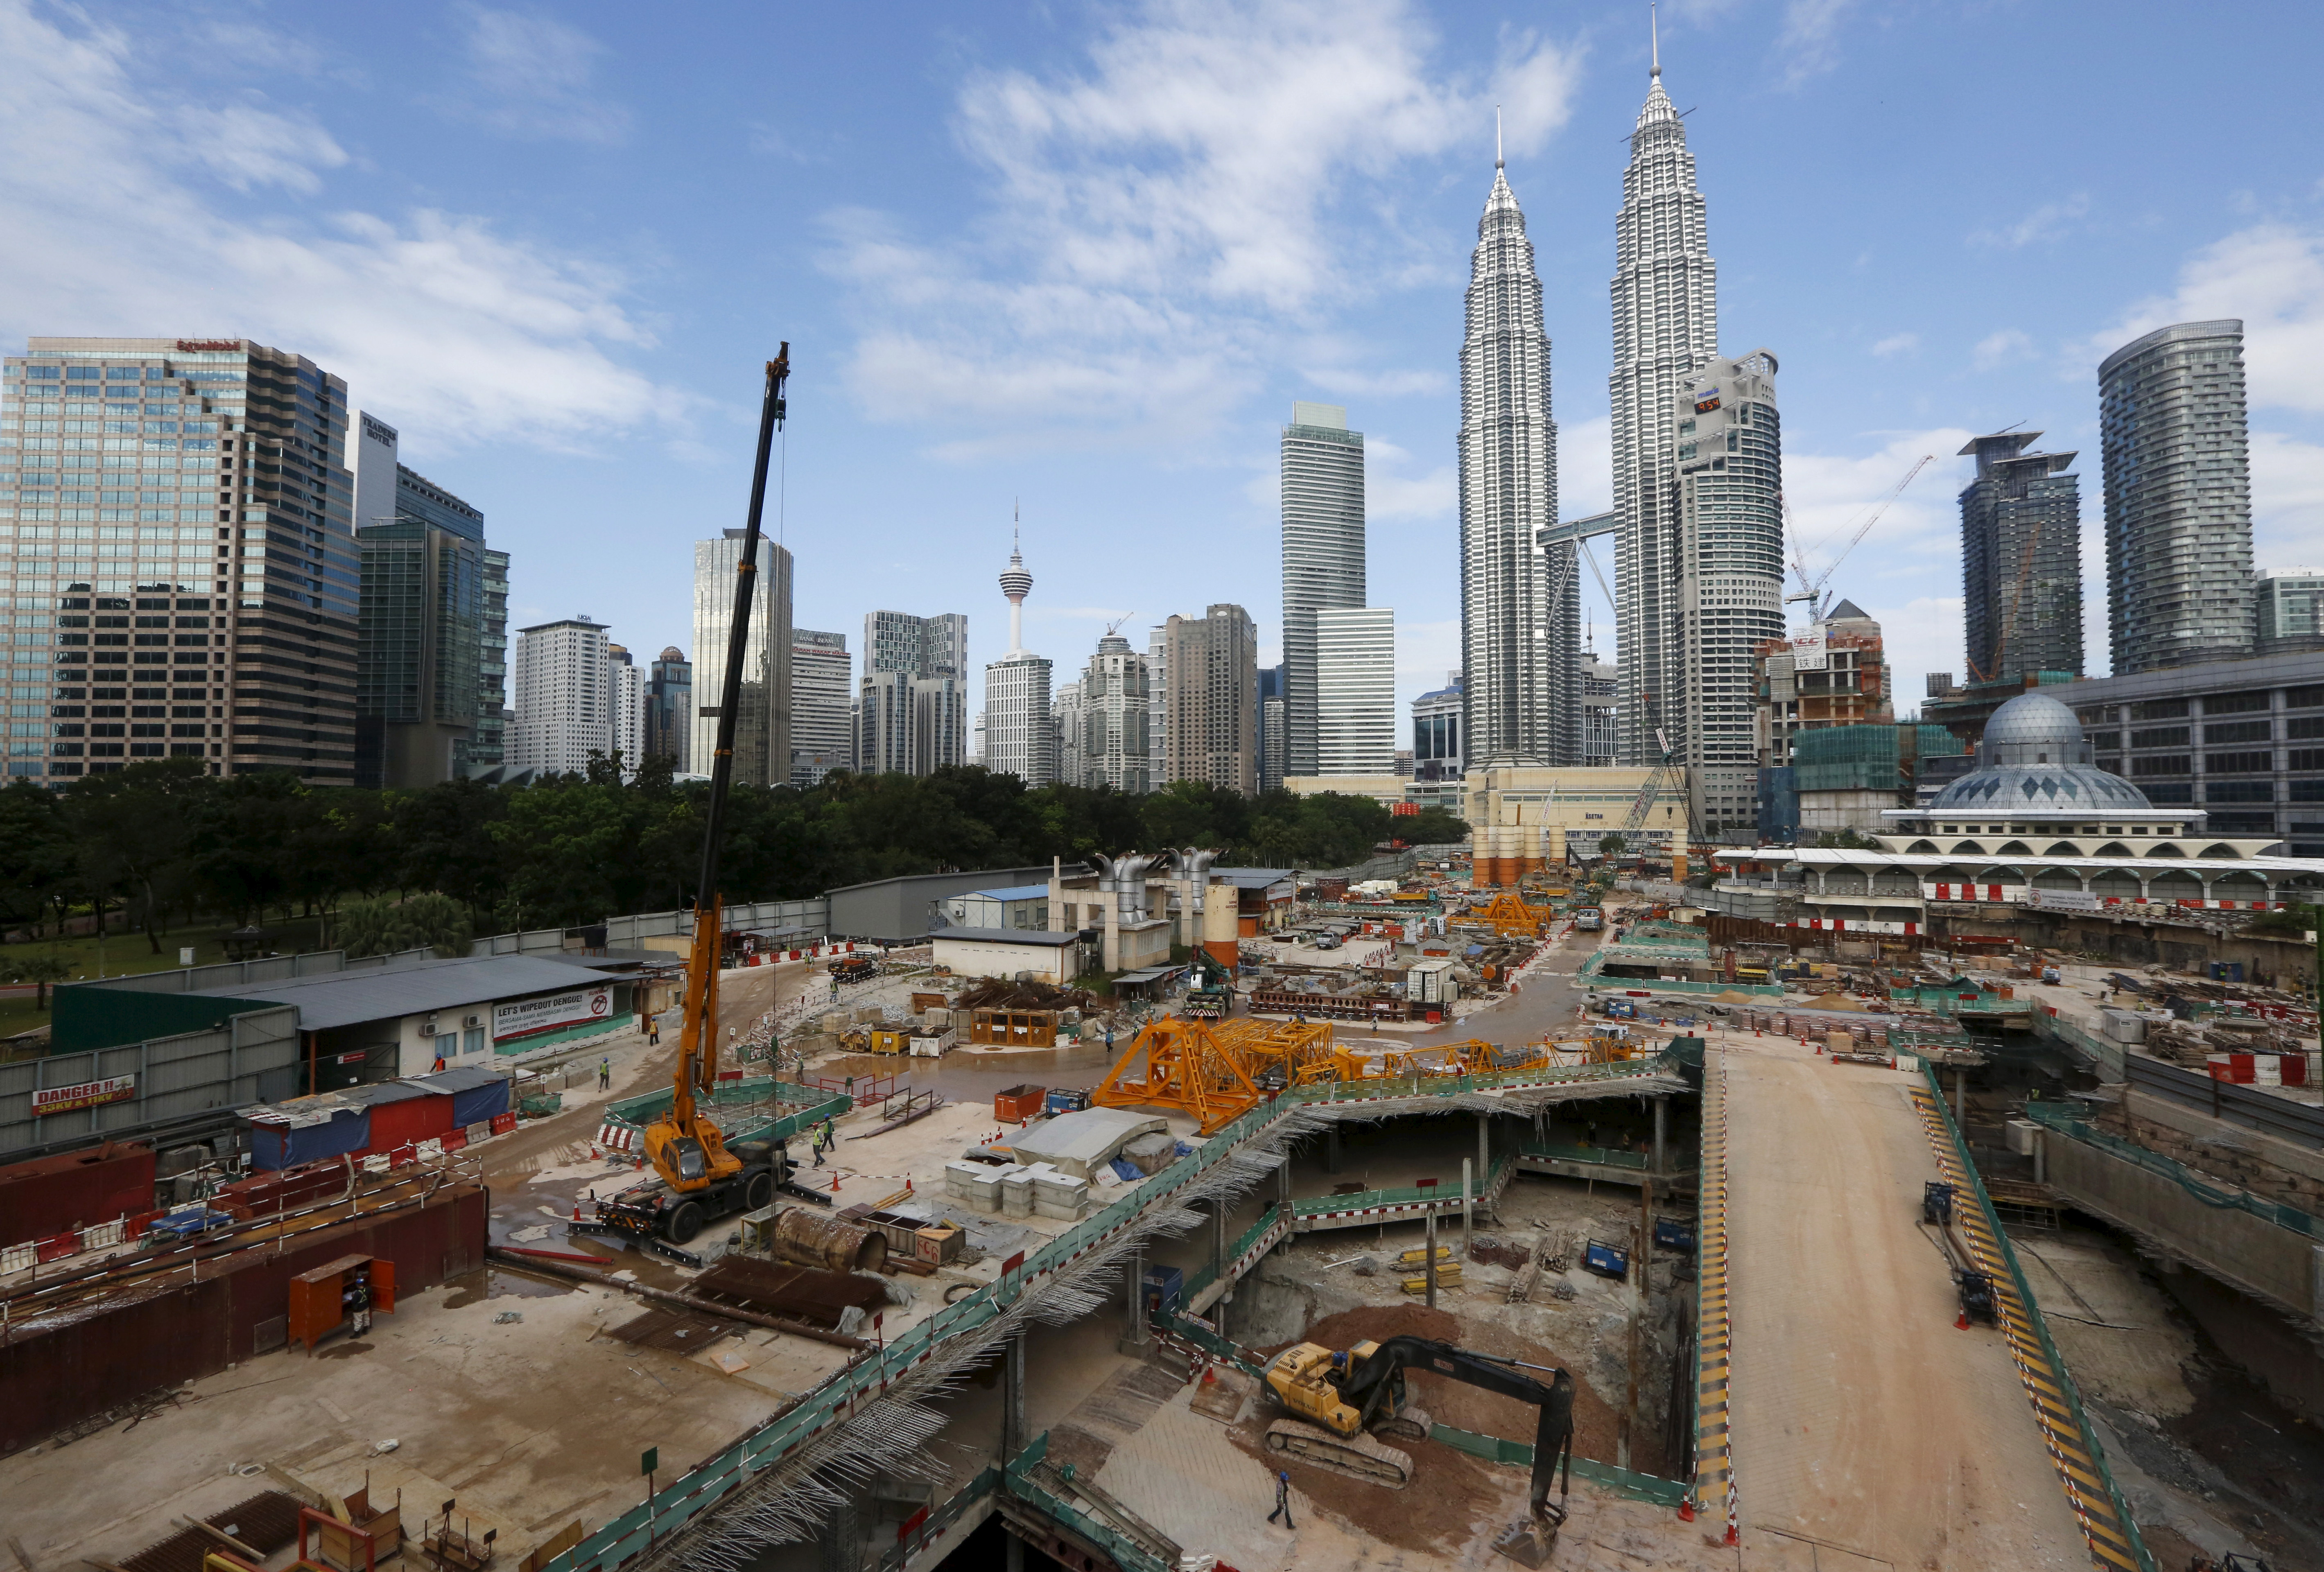 A view of a building site beneath the Petronas Towers in Kuala Lumpur